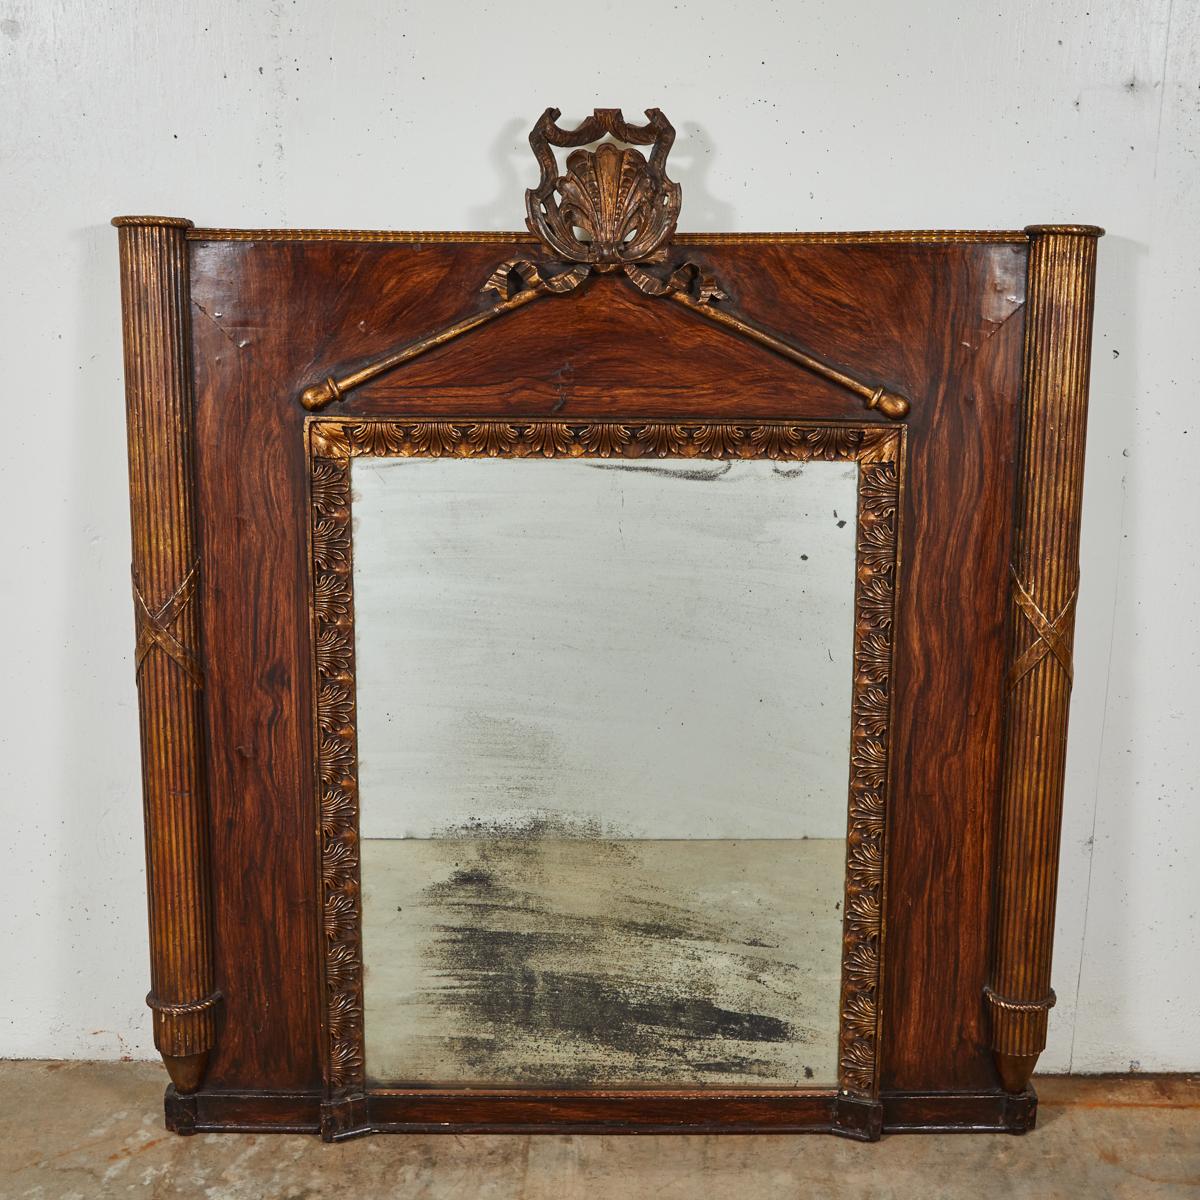 Dramatic early 19th-century carved and gilt wood mirror with painted faux bois accents from France.  Flanked on either side by two reeded columns with conical finial bases, the mirror features a palmette motif border and pediment crowned by a crest